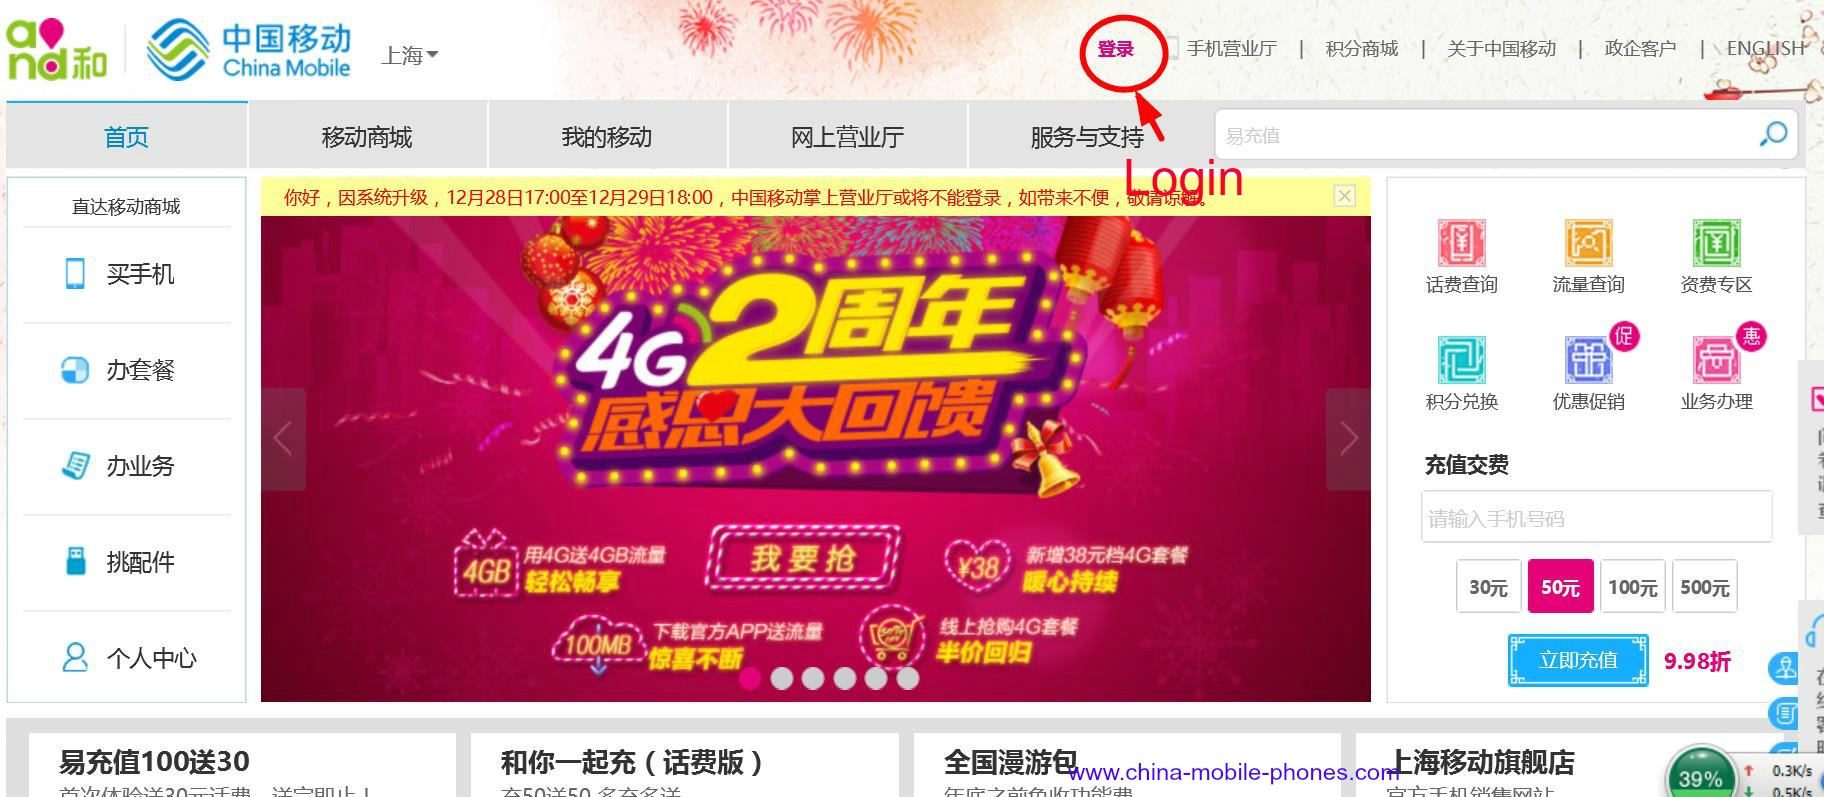 China mobile official website